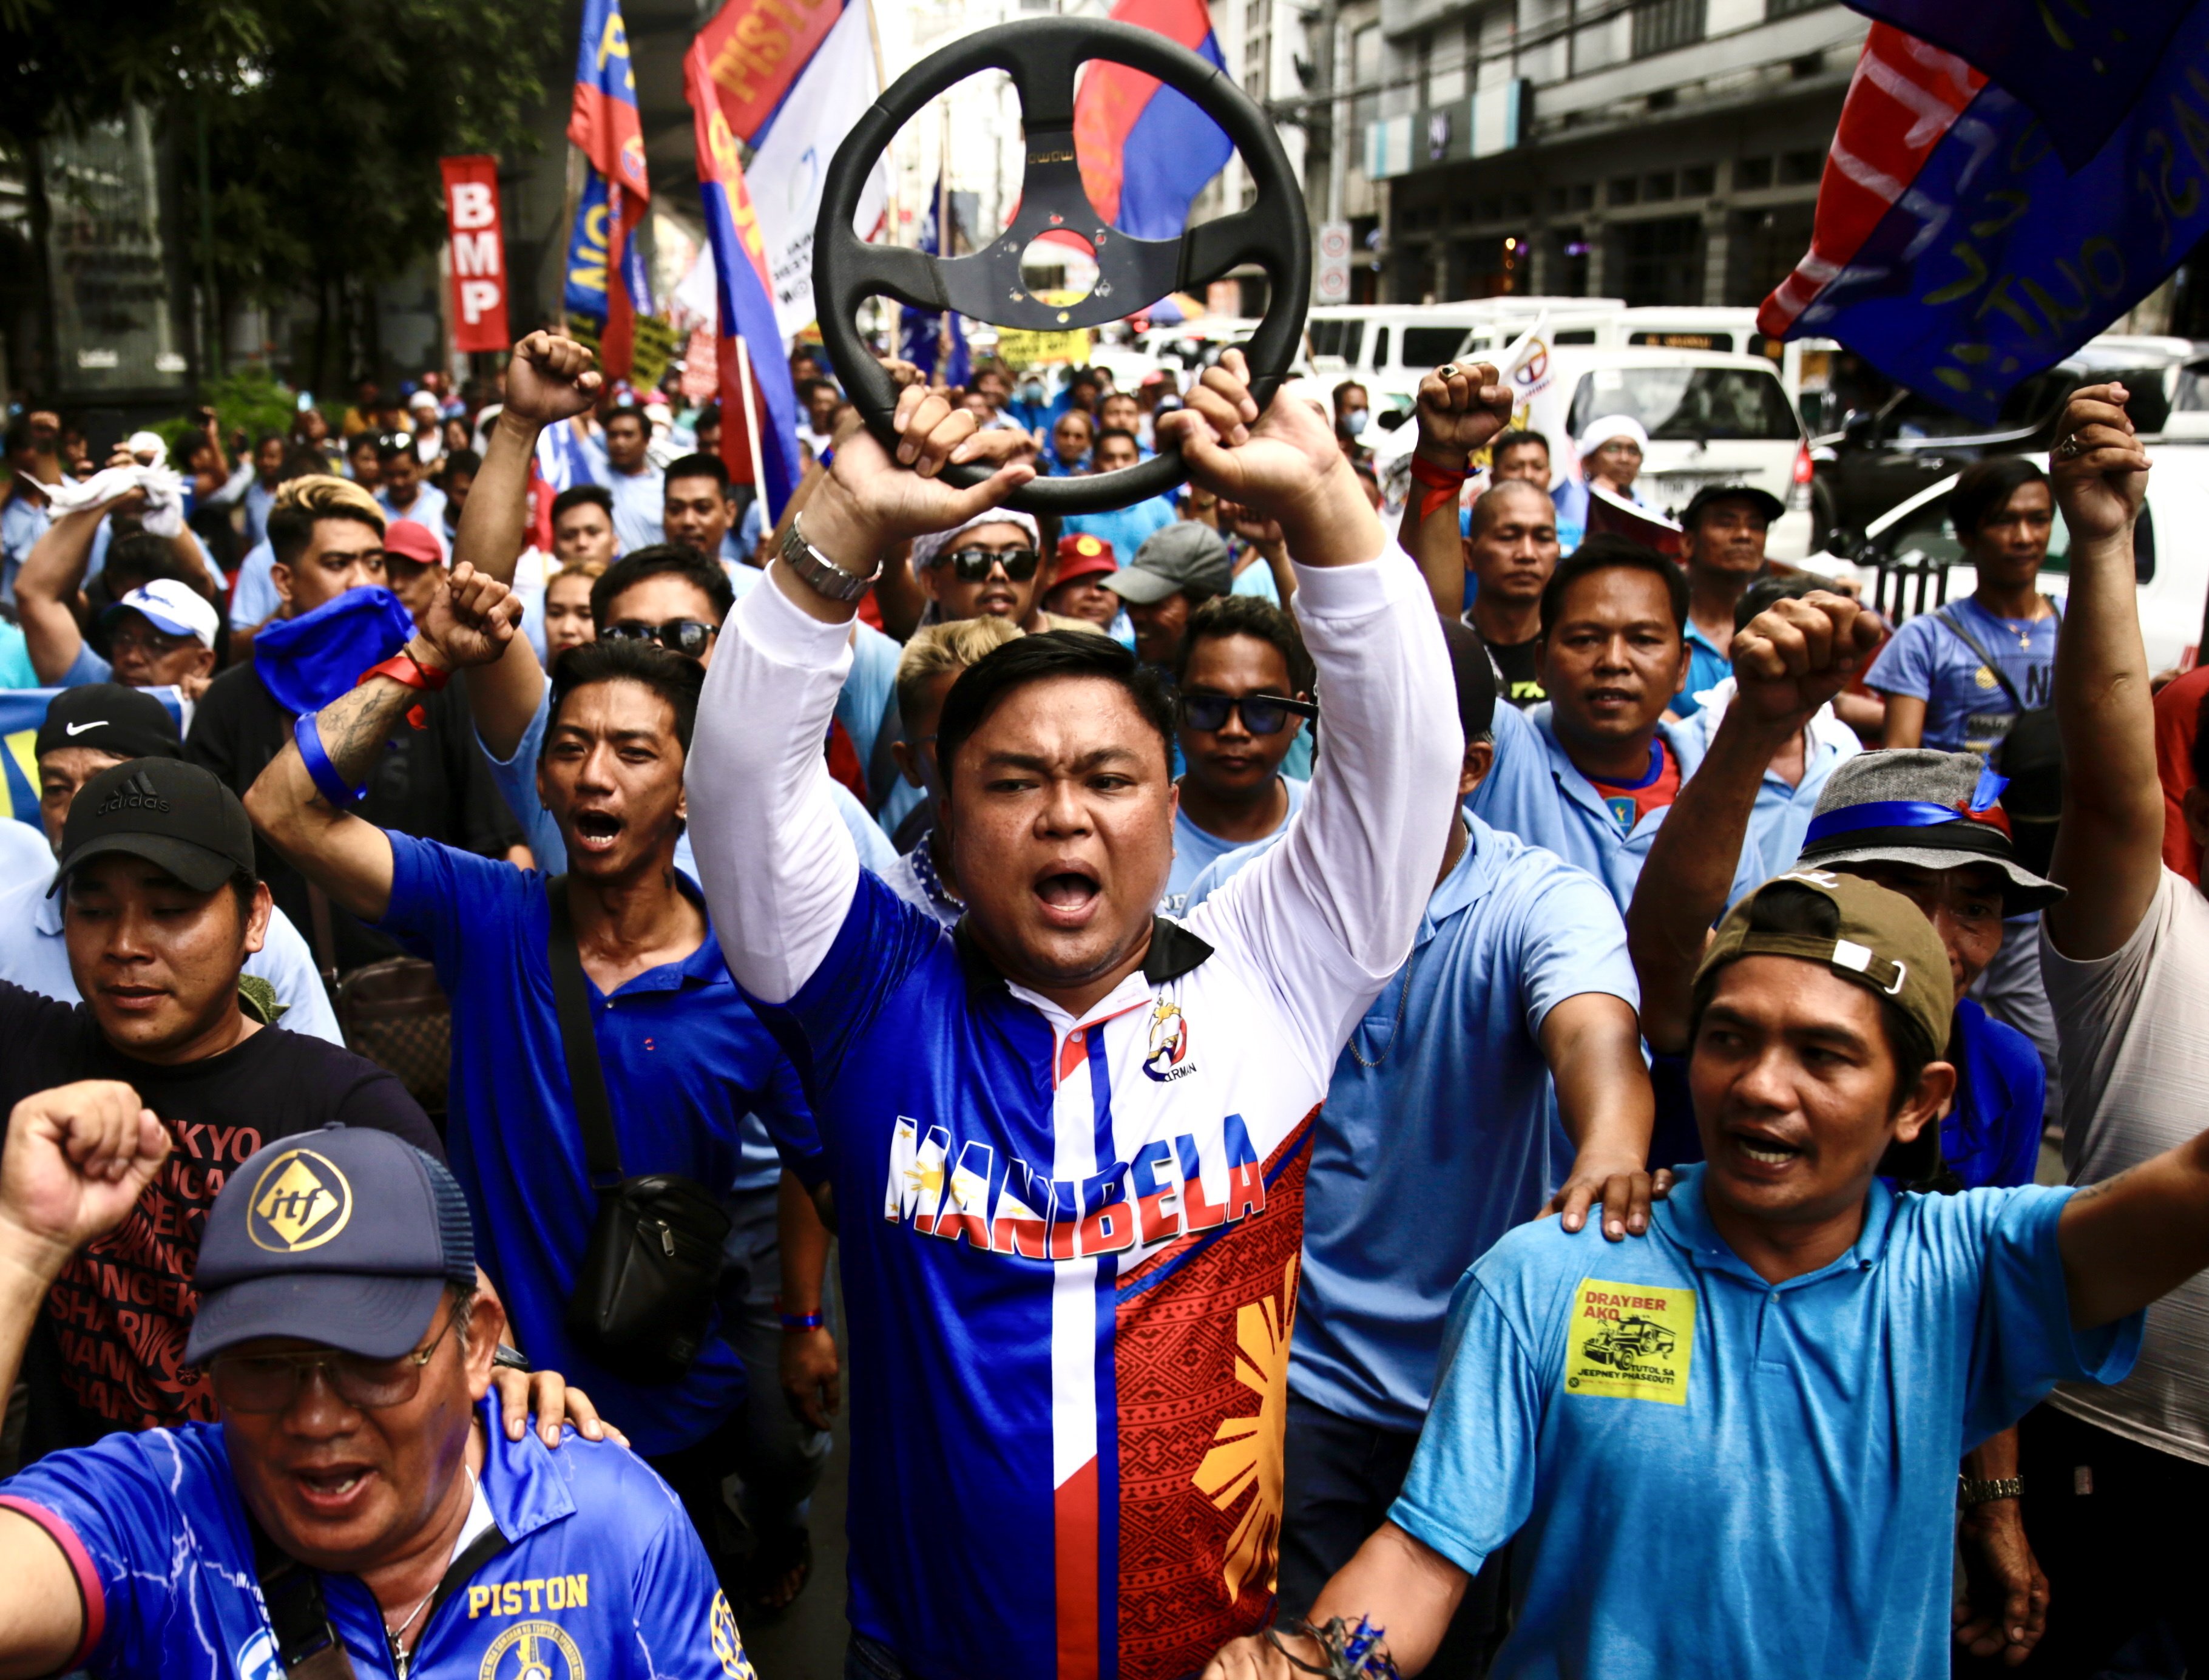 Jeepney drivers shout slogans as they stage a protest rally during a transport strike in Manila on December 29. Photo: EPA-EFE